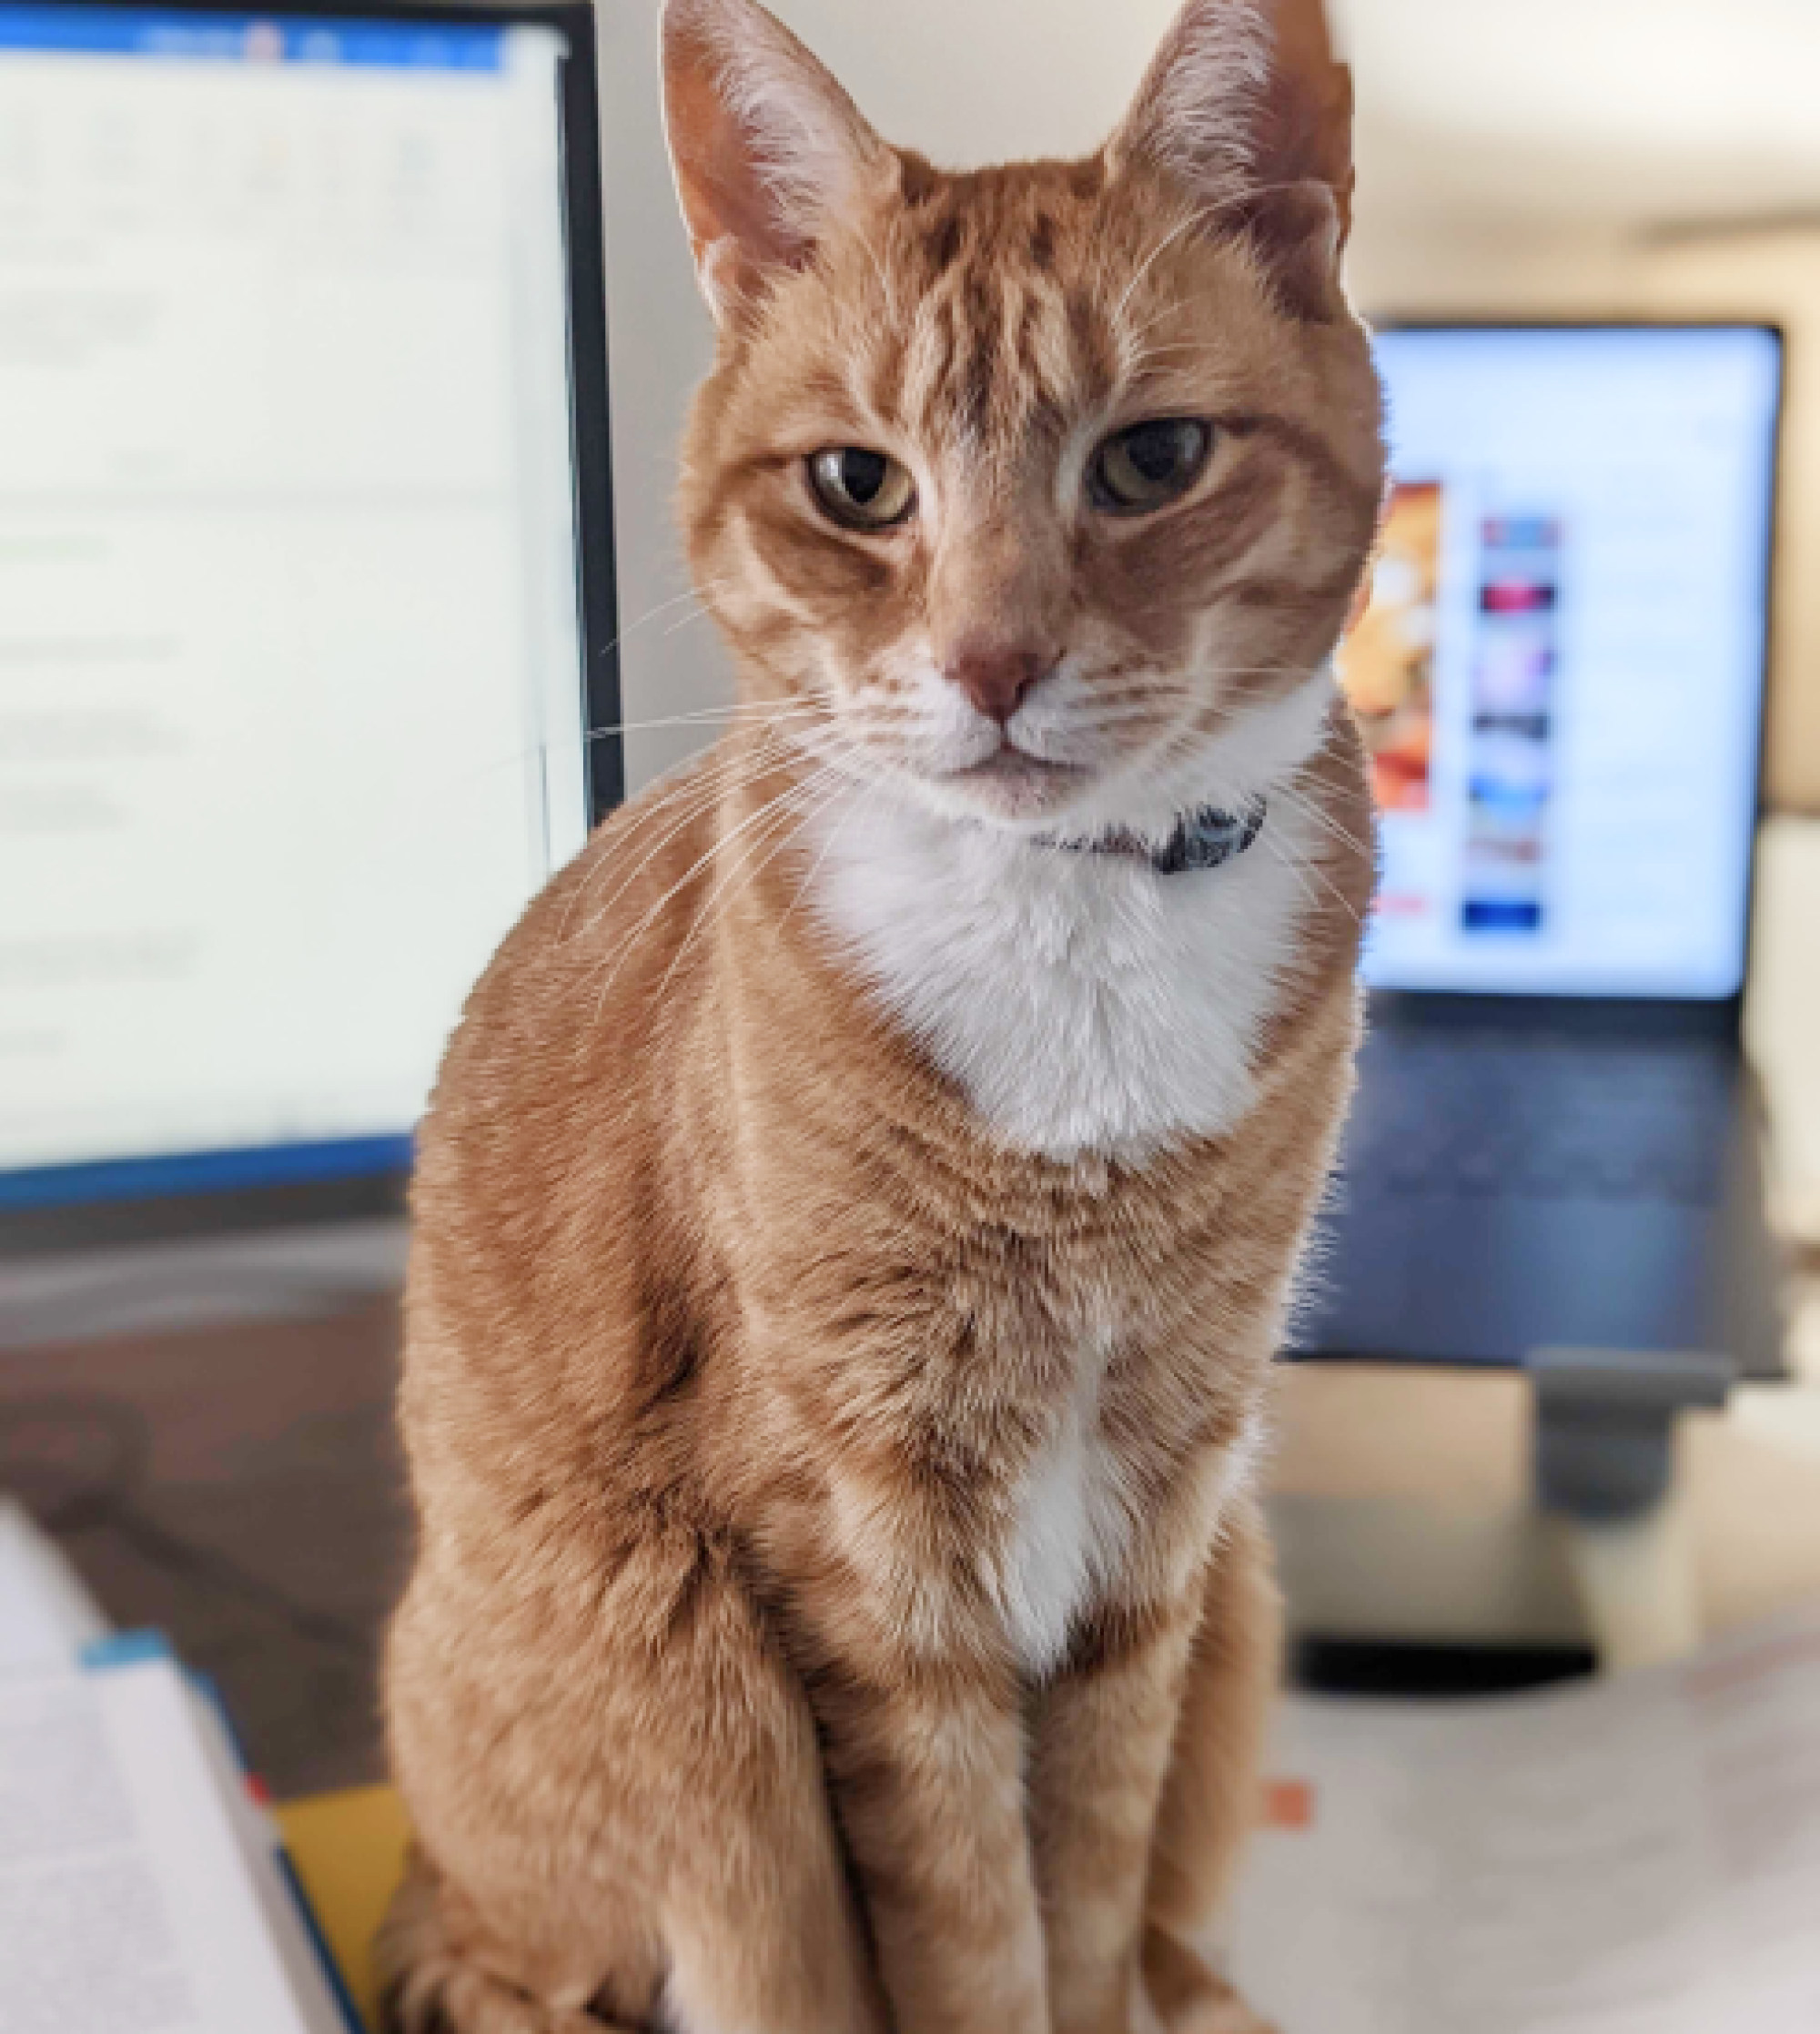 A cat with light-brown fur sitting on a computer desk in front of two monitors